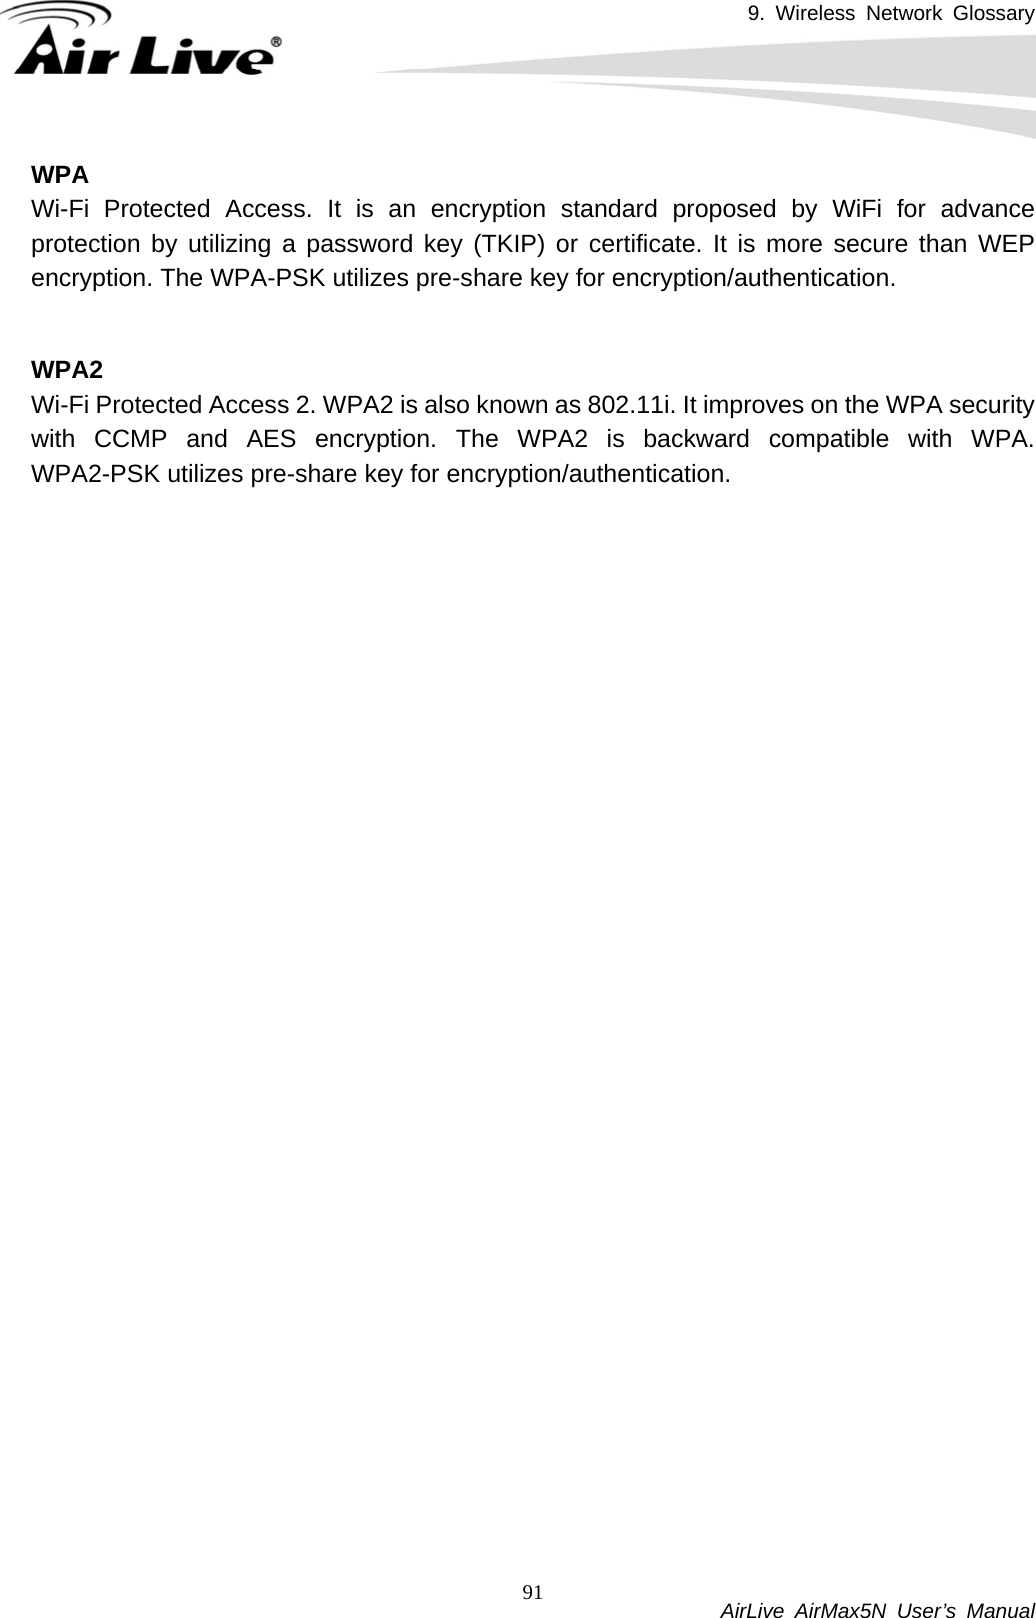 9. Wireless Network Glossary           AirLive AirMax5N User’s Manual 91WPAWi-Fi Protected Access. It is an encryption standard proposed by WiFi for advance protection by utilizing a password key (TKIP) or certificate. It is more secure than WEP encryption. The WPA-PSK utilizes pre-share key for encryption/authentication.     WPA2Wi-Fi Protected Access 2. WPA2 is also known as 802.11i. It improves on the WPA security with CCMP and AES encryption. The WPA2 is backward compatible with WPA. WPA2-PSK utilizes pre-share key for encryption/authentication.    